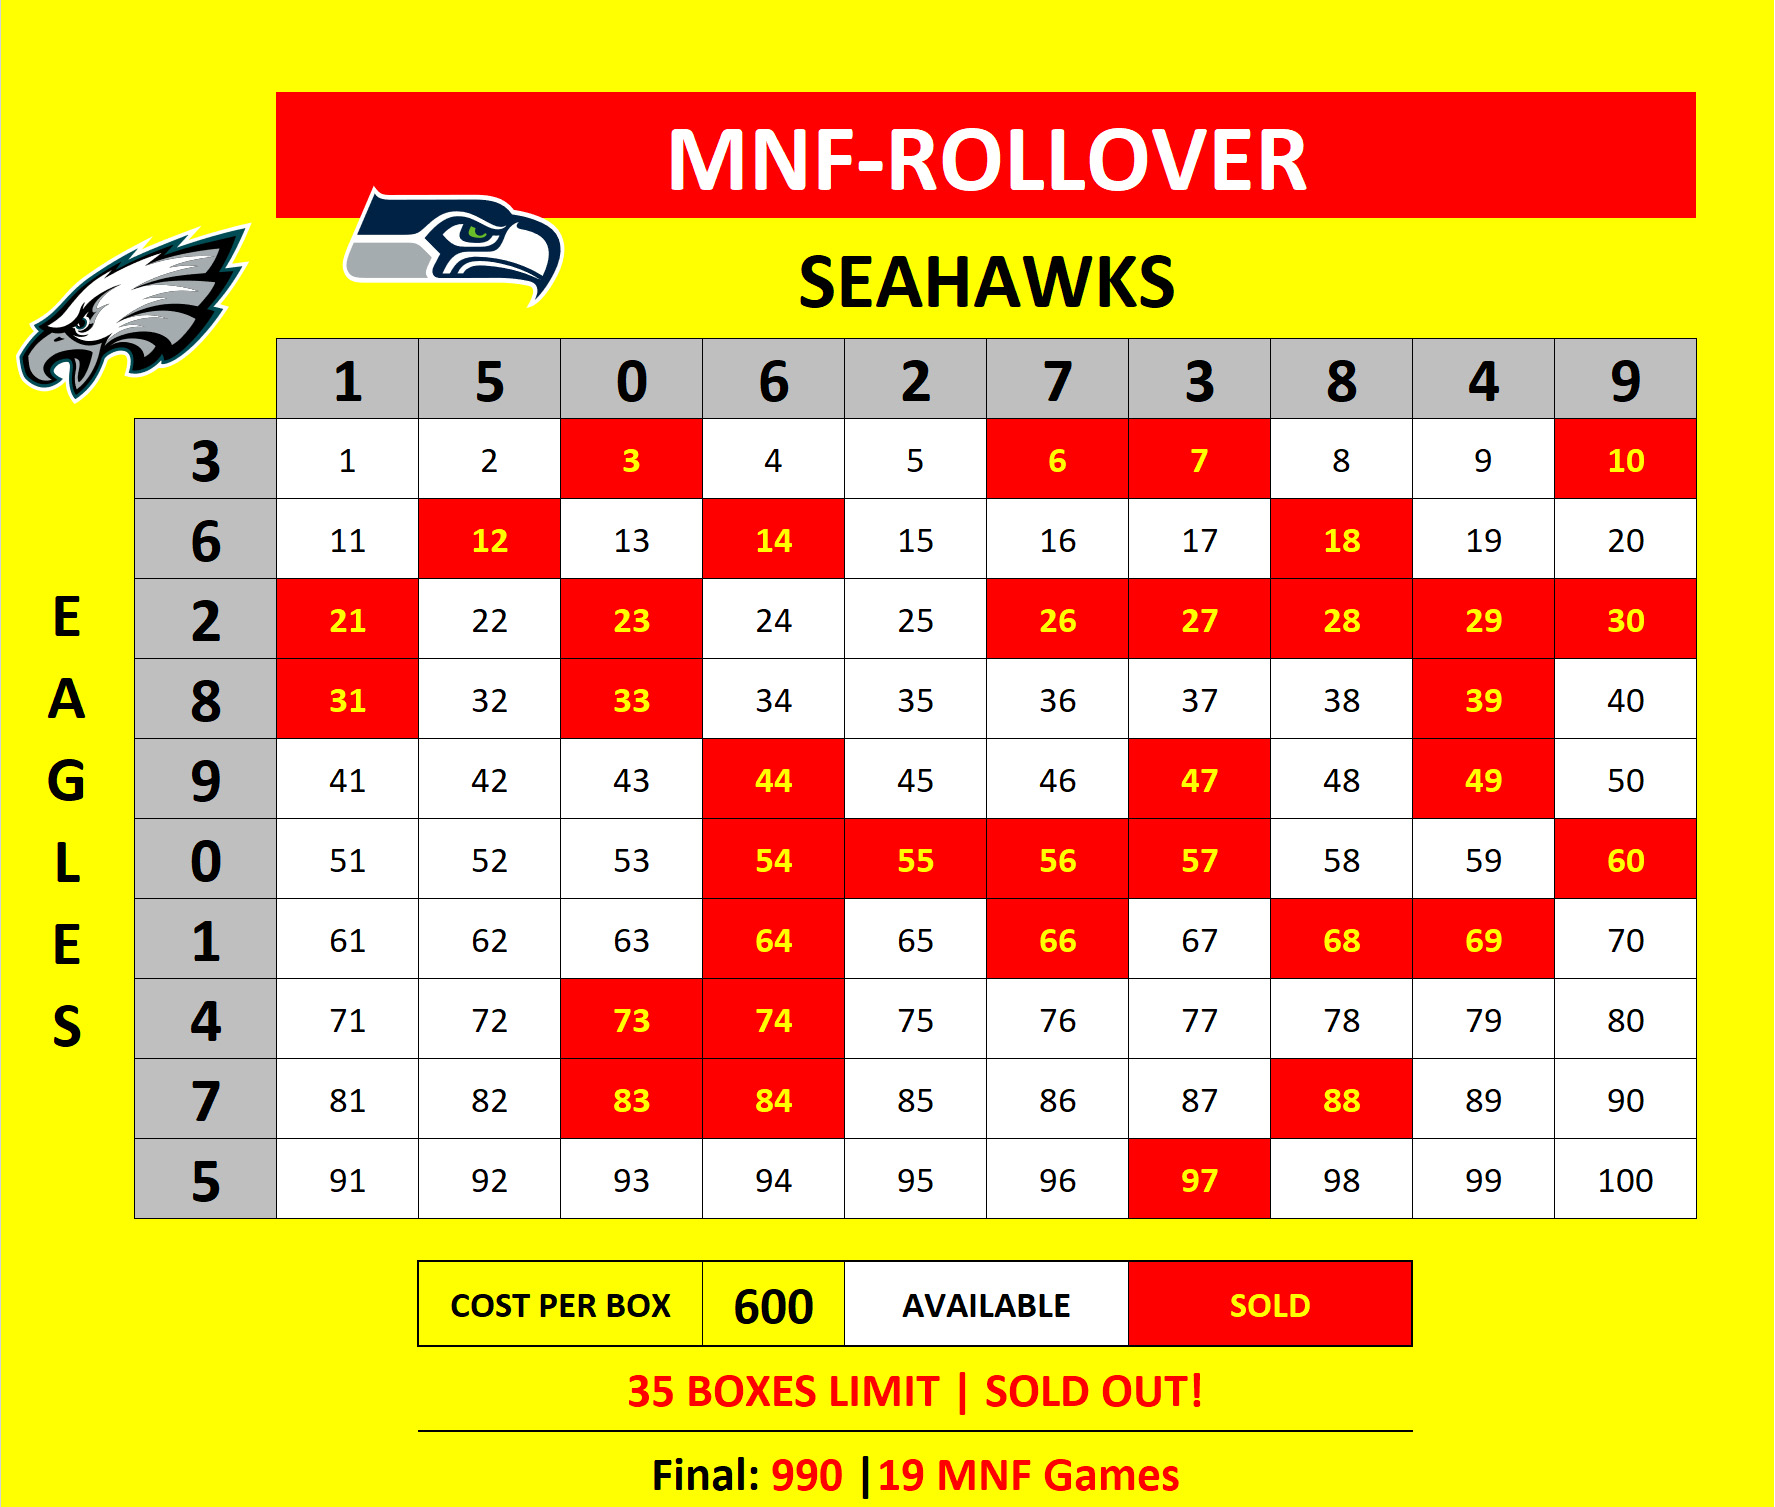 MNF-Rollover-B Eagles at Seahawks